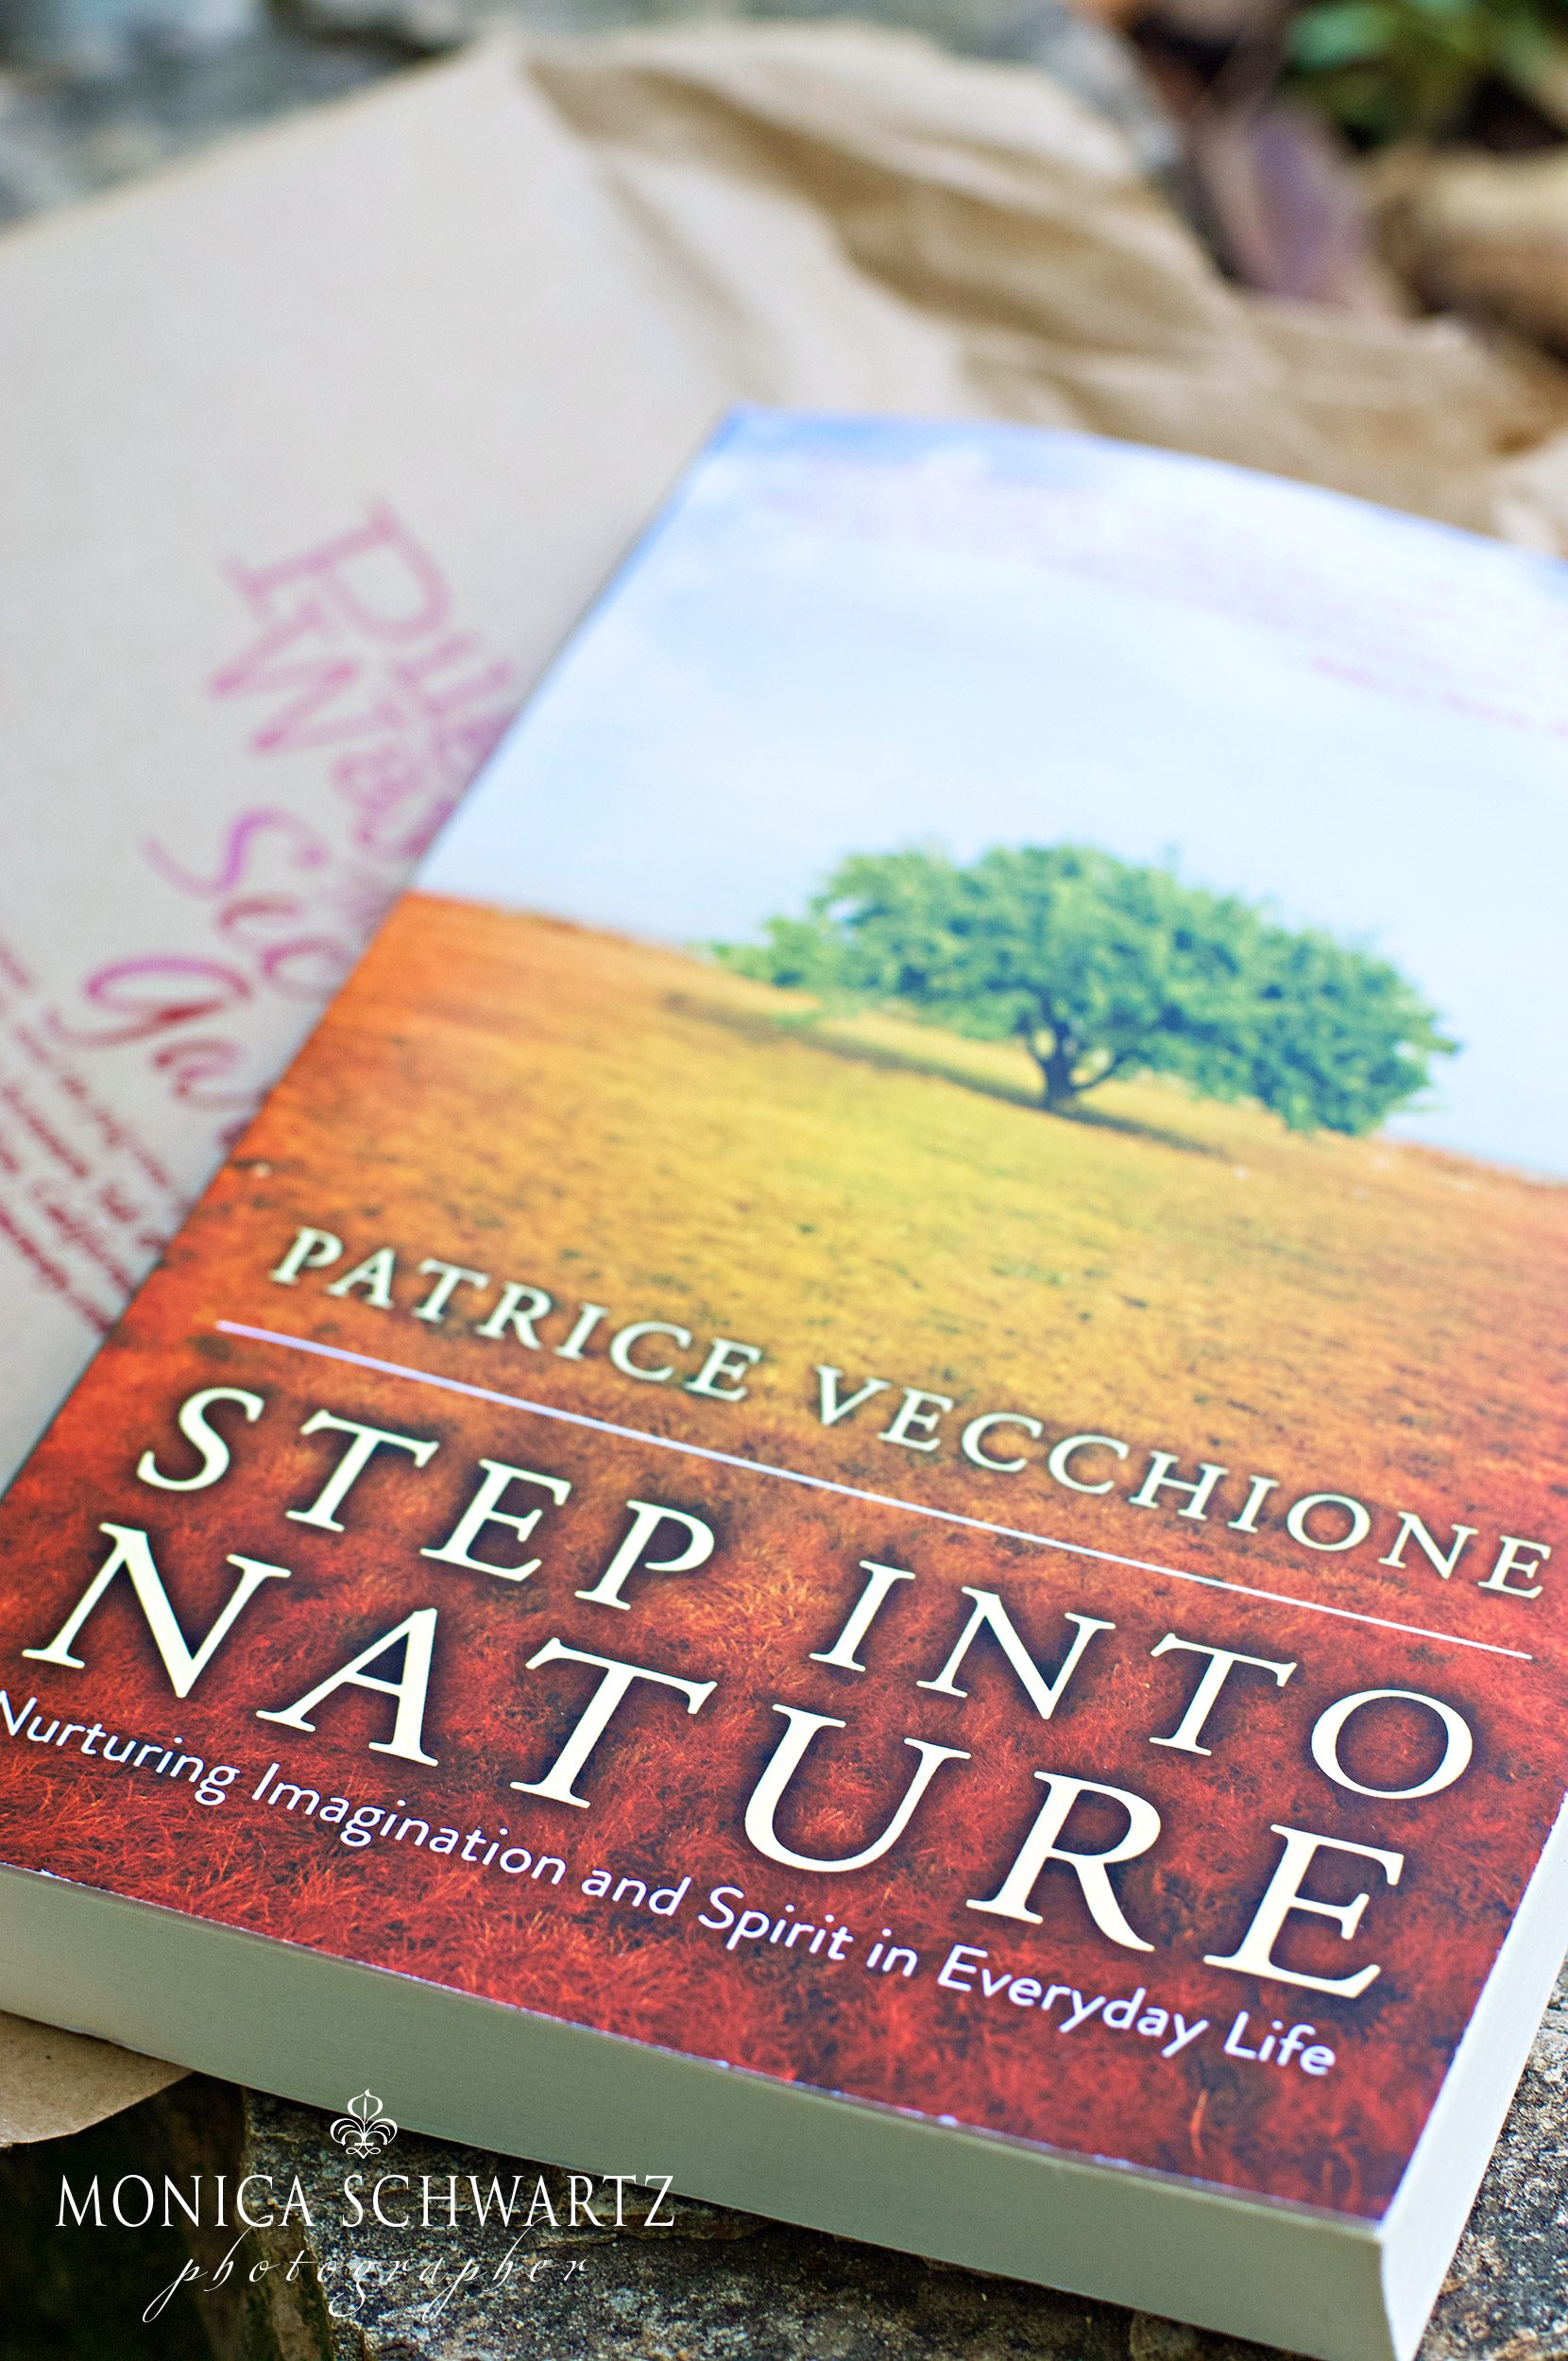 Book-Step-into-Nature-by-Patrice-Vecchione